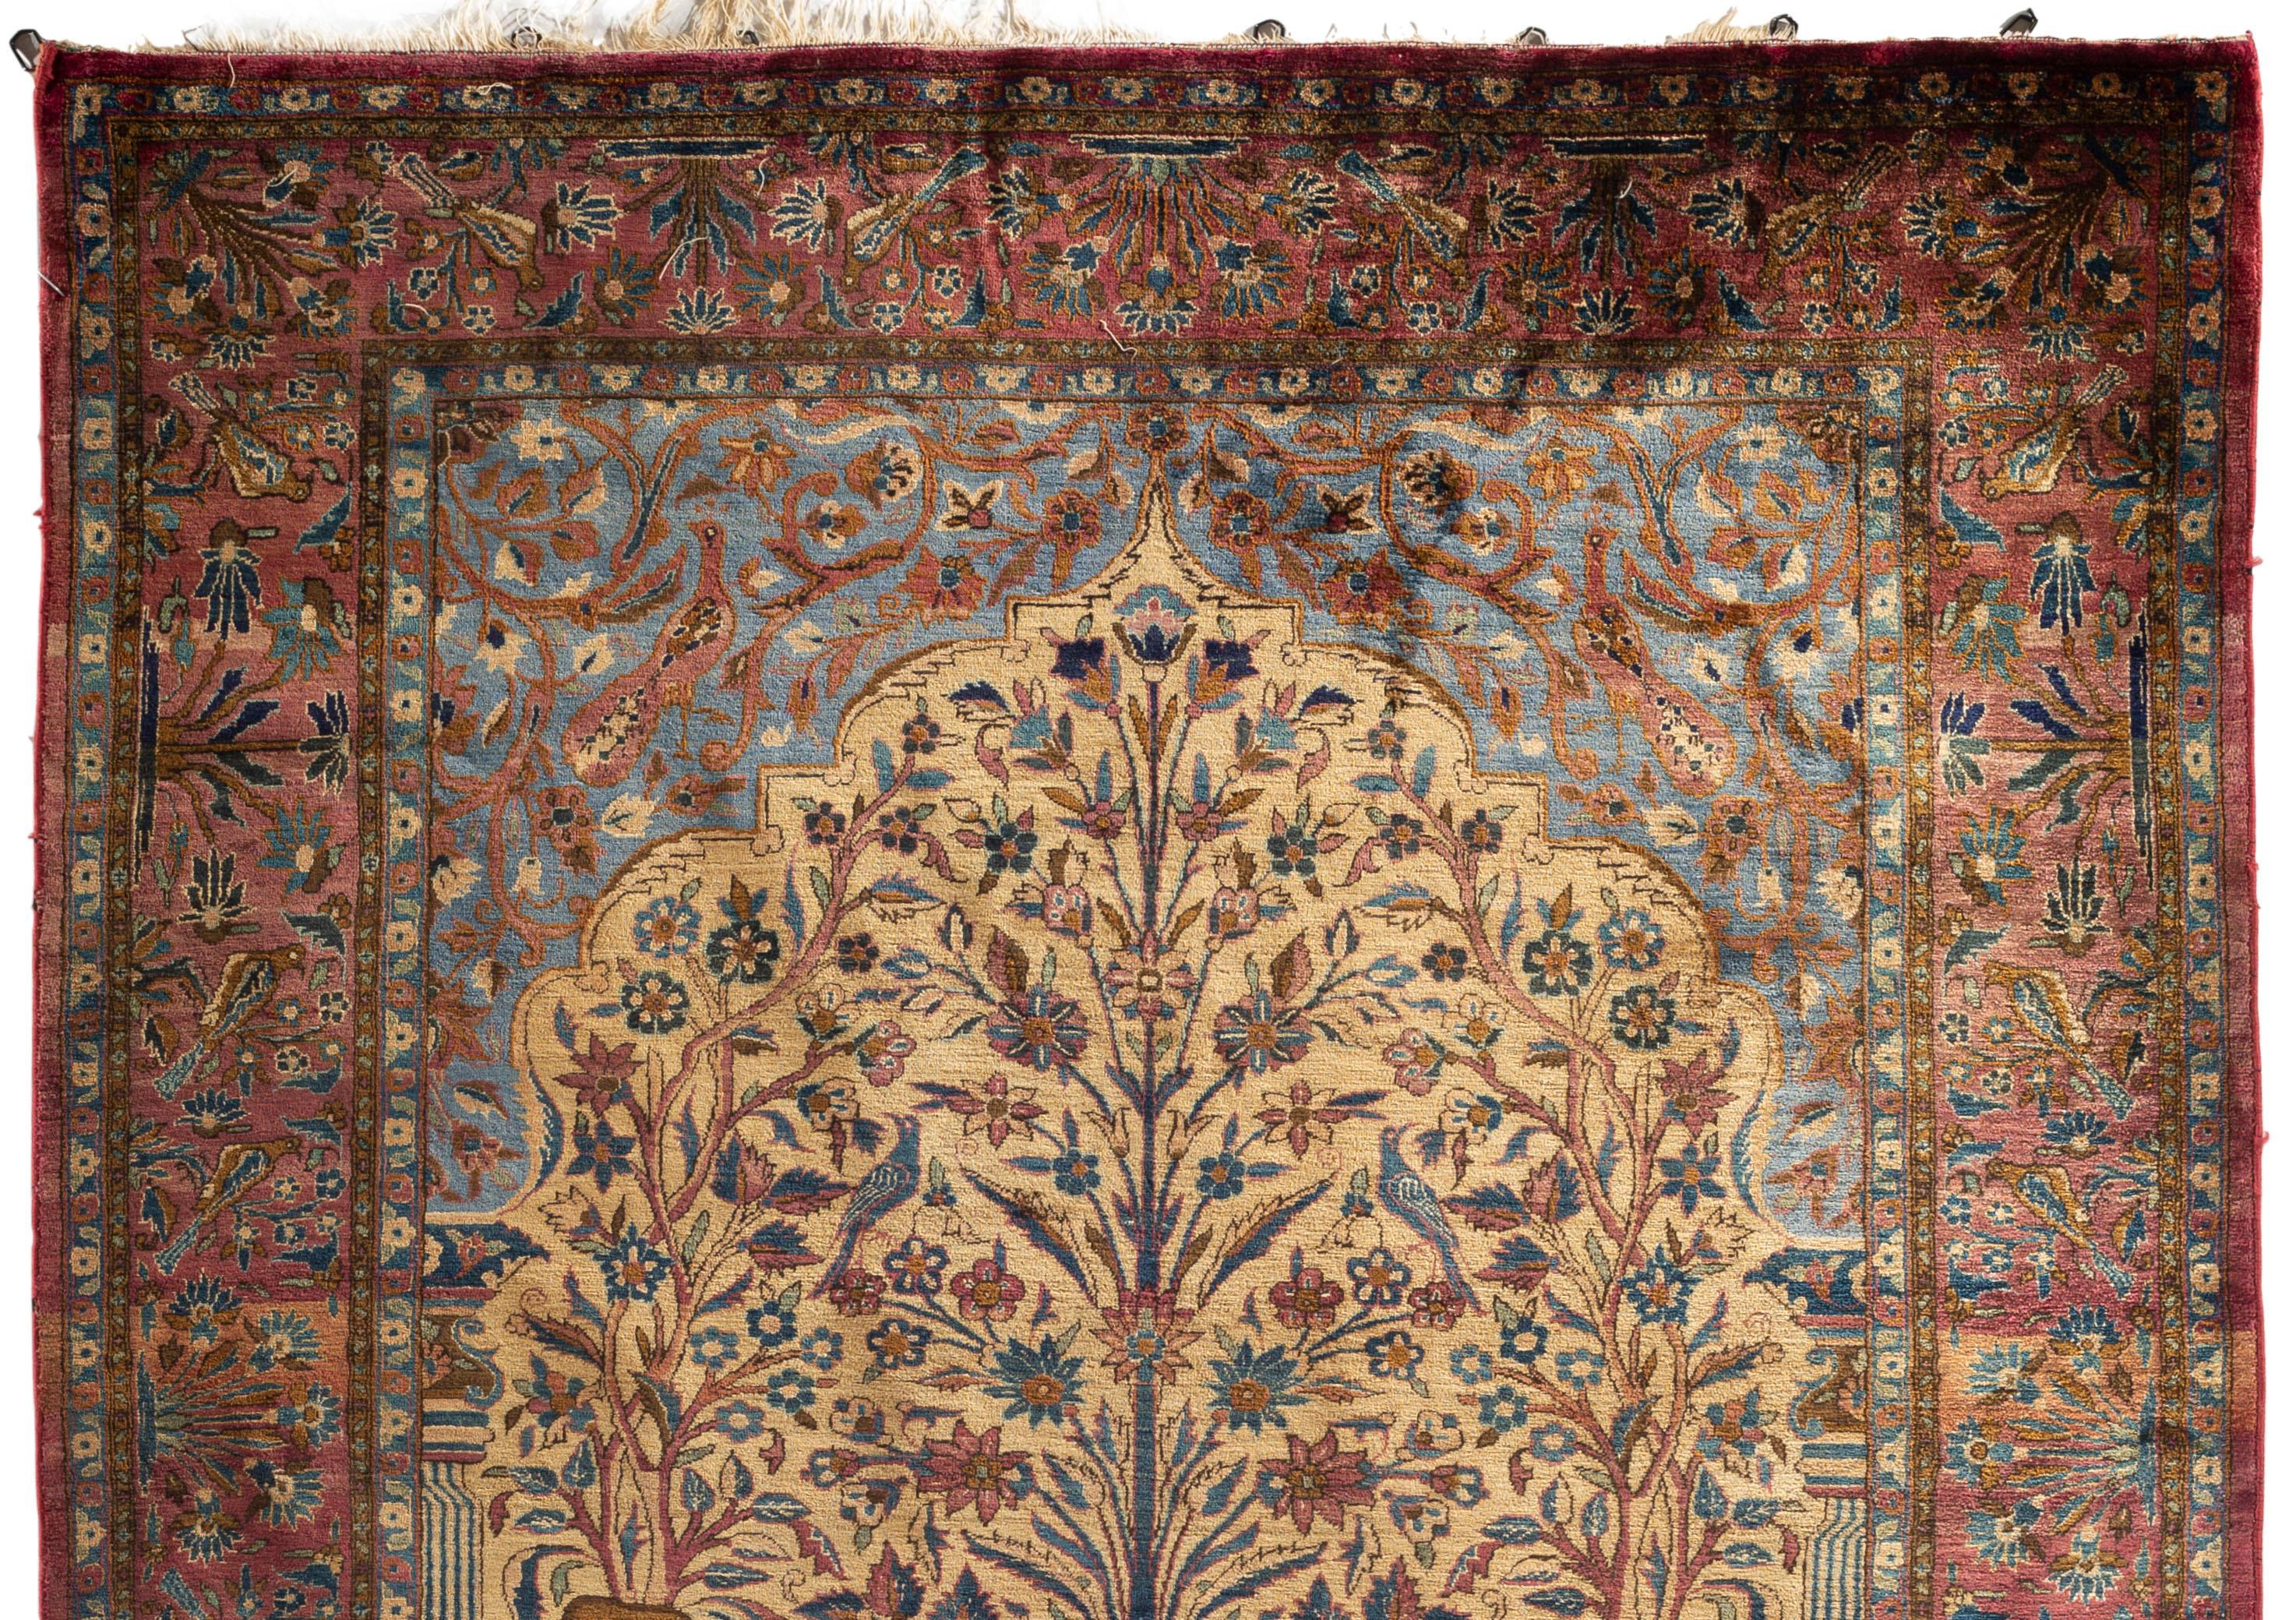 Antique Persian Silk Kashan, circa 1900. Finely woven in luxurious silk with the main ivory field having wonderfully detailed floral and plant design in a range of soft gentle colors, interspersed with animals and birds to create a tranquil scene